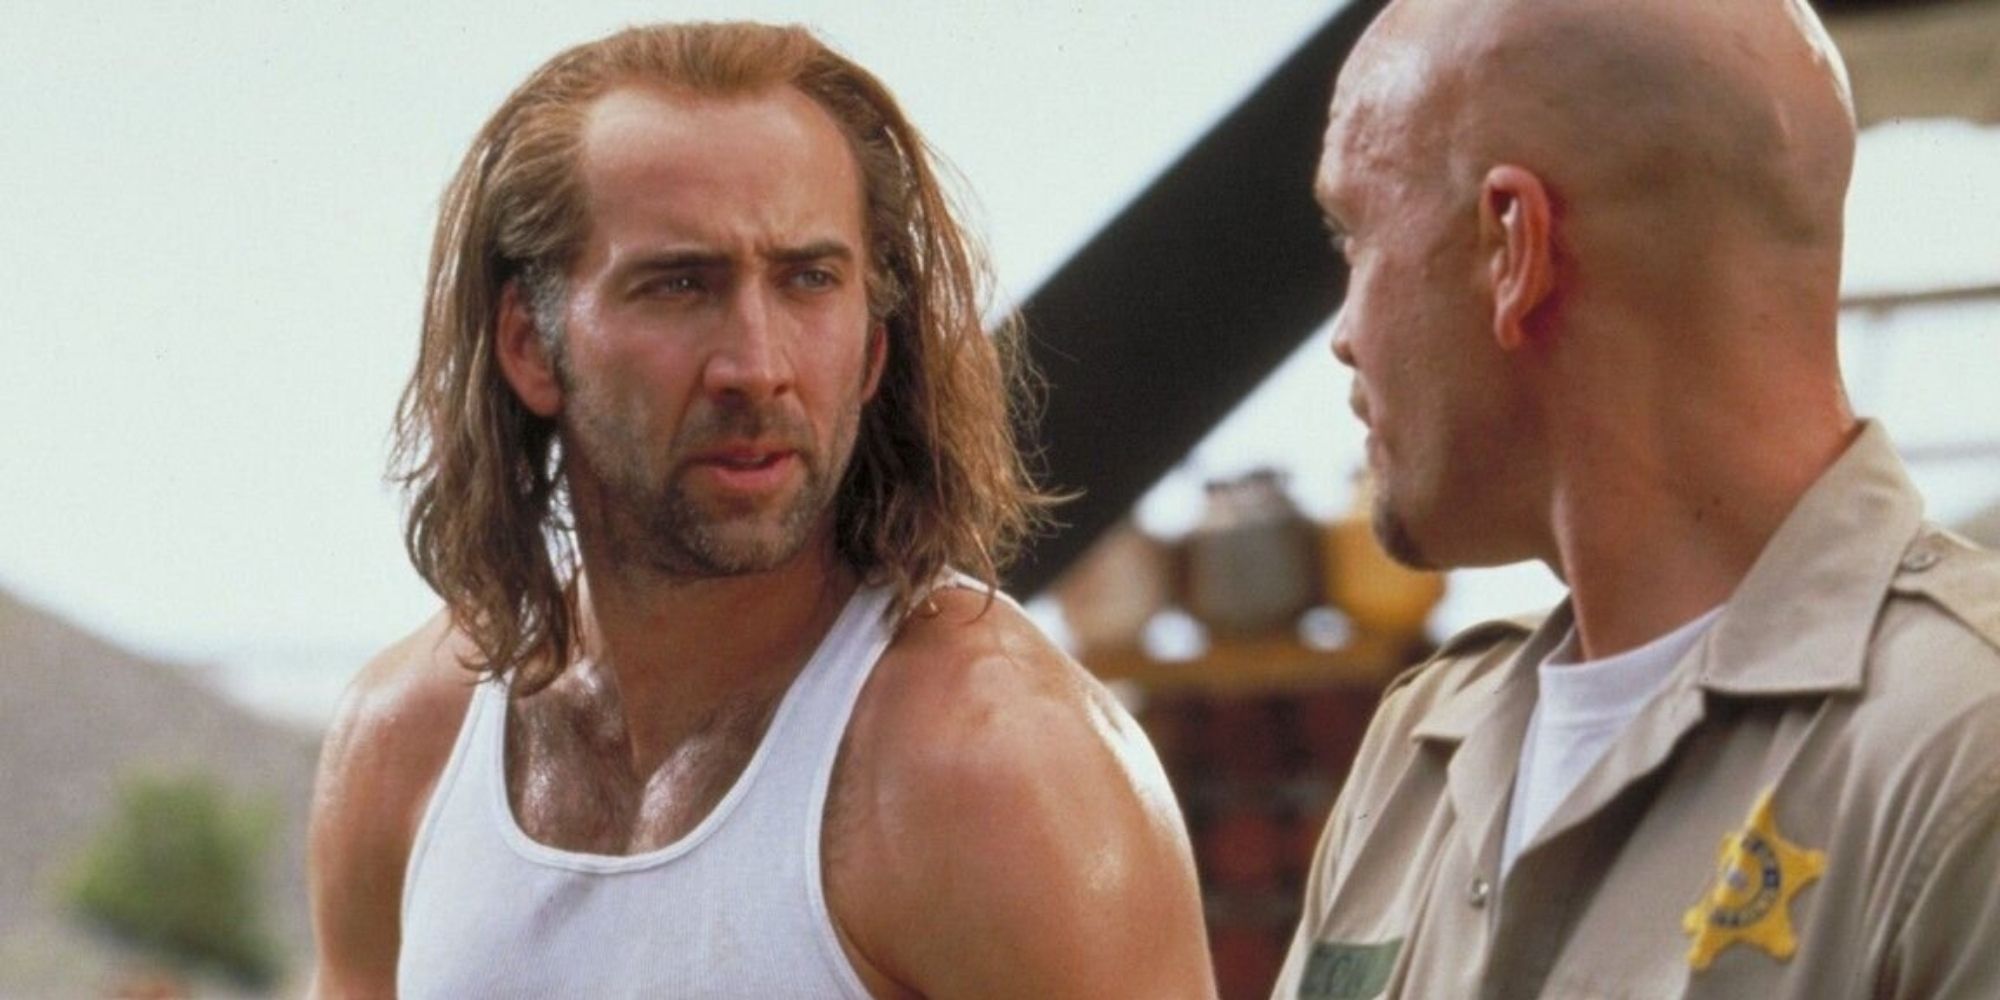 Nicolas Cage as Cameron Poe talking to "The Virus" Grissom in Con Air